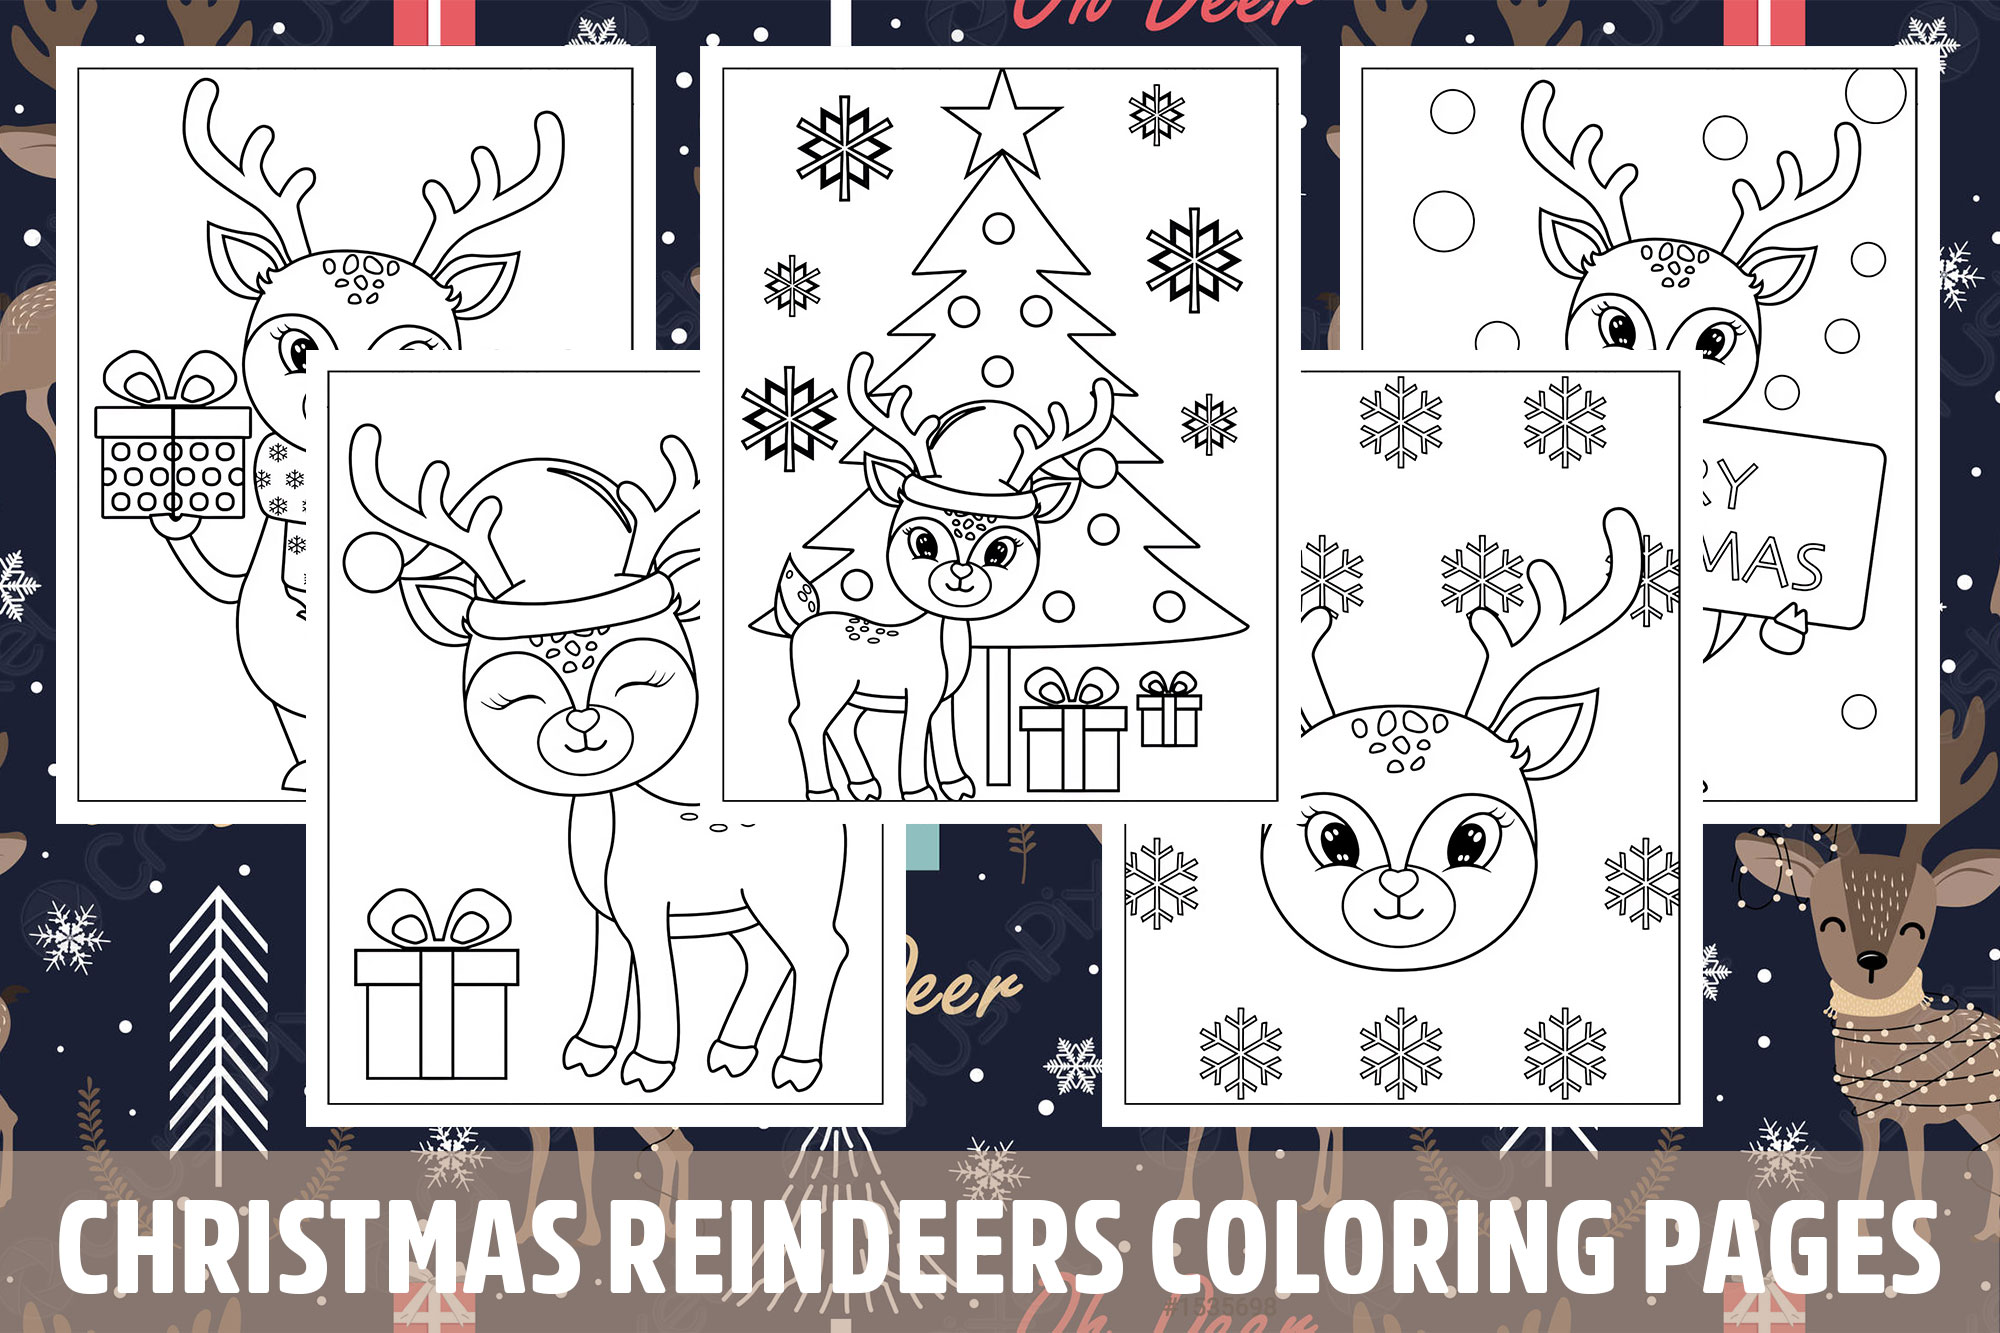 Christmas reindeers coloring pages for kids girls boys teens birthday school activity made by teachers